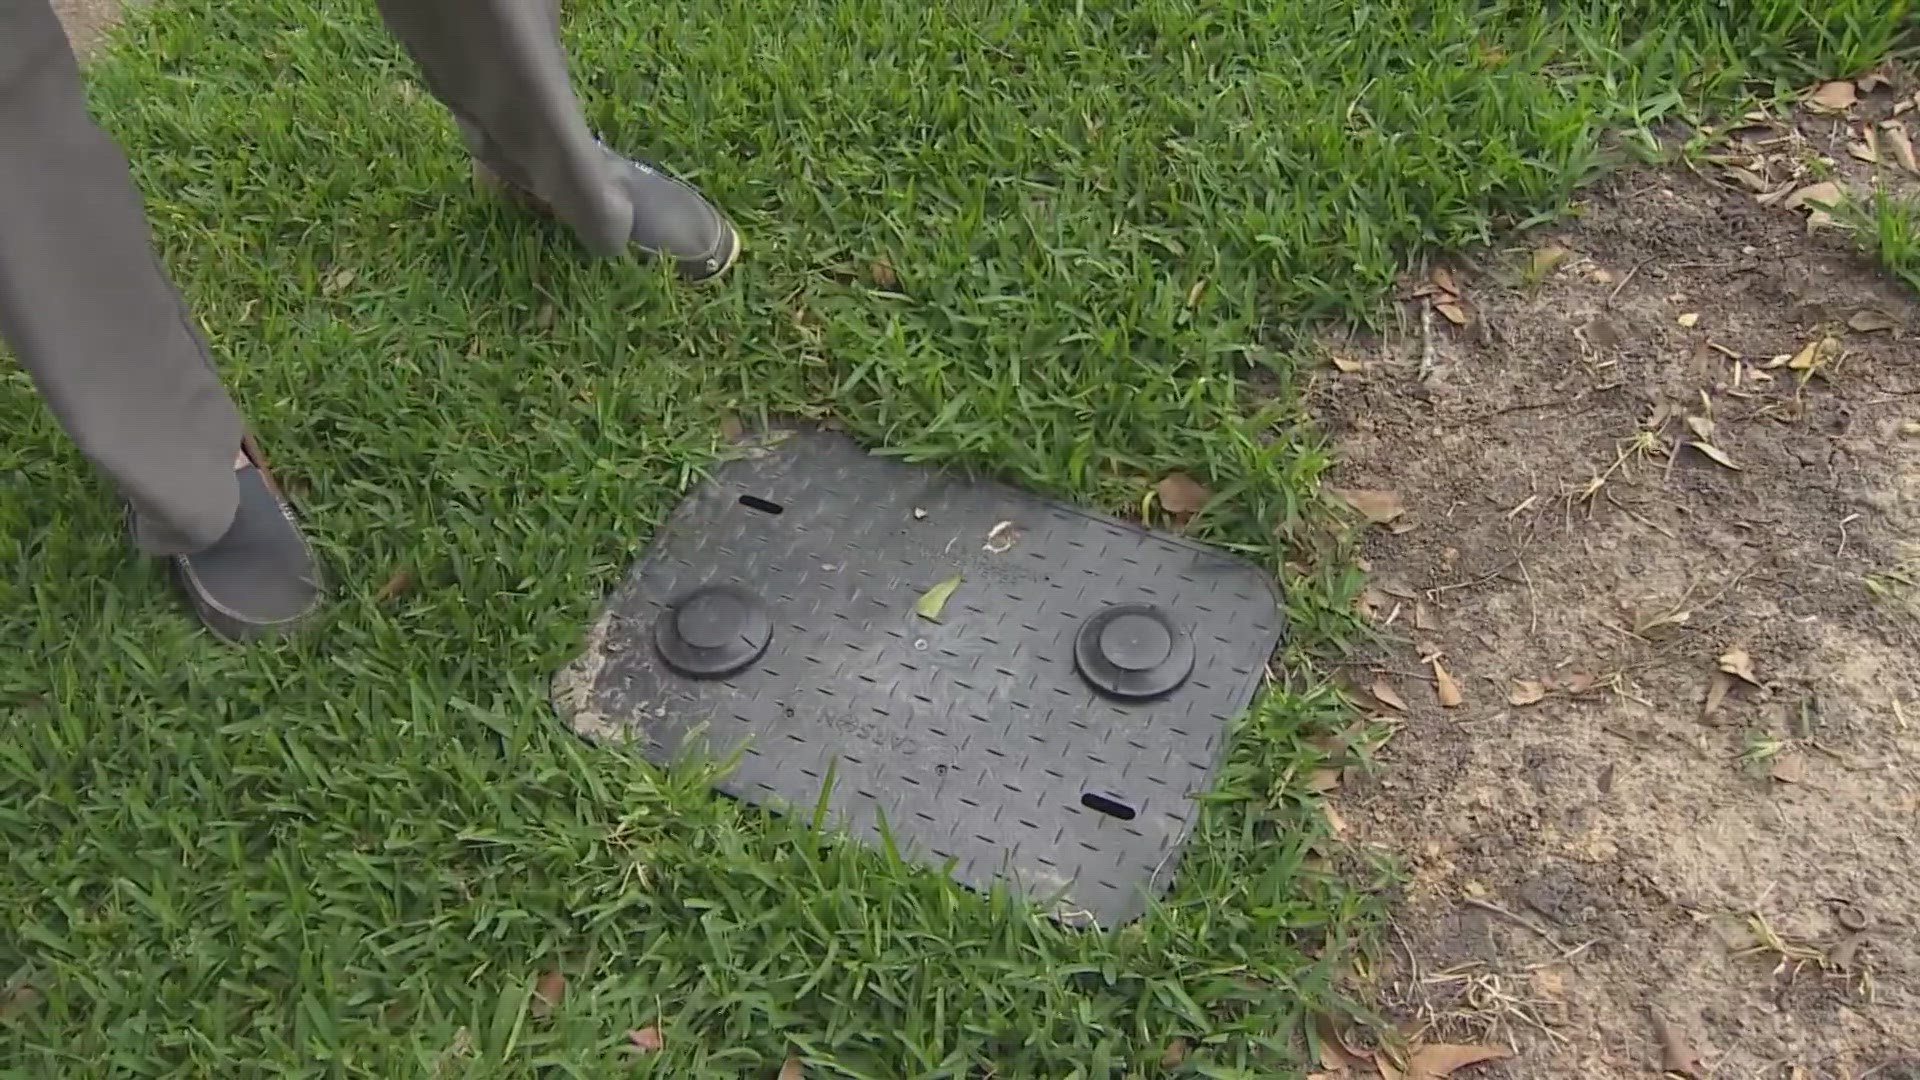 Houston Public Works said it's aware of issues that started when new electronic meters were installed and apologized for the "stress and confusion."